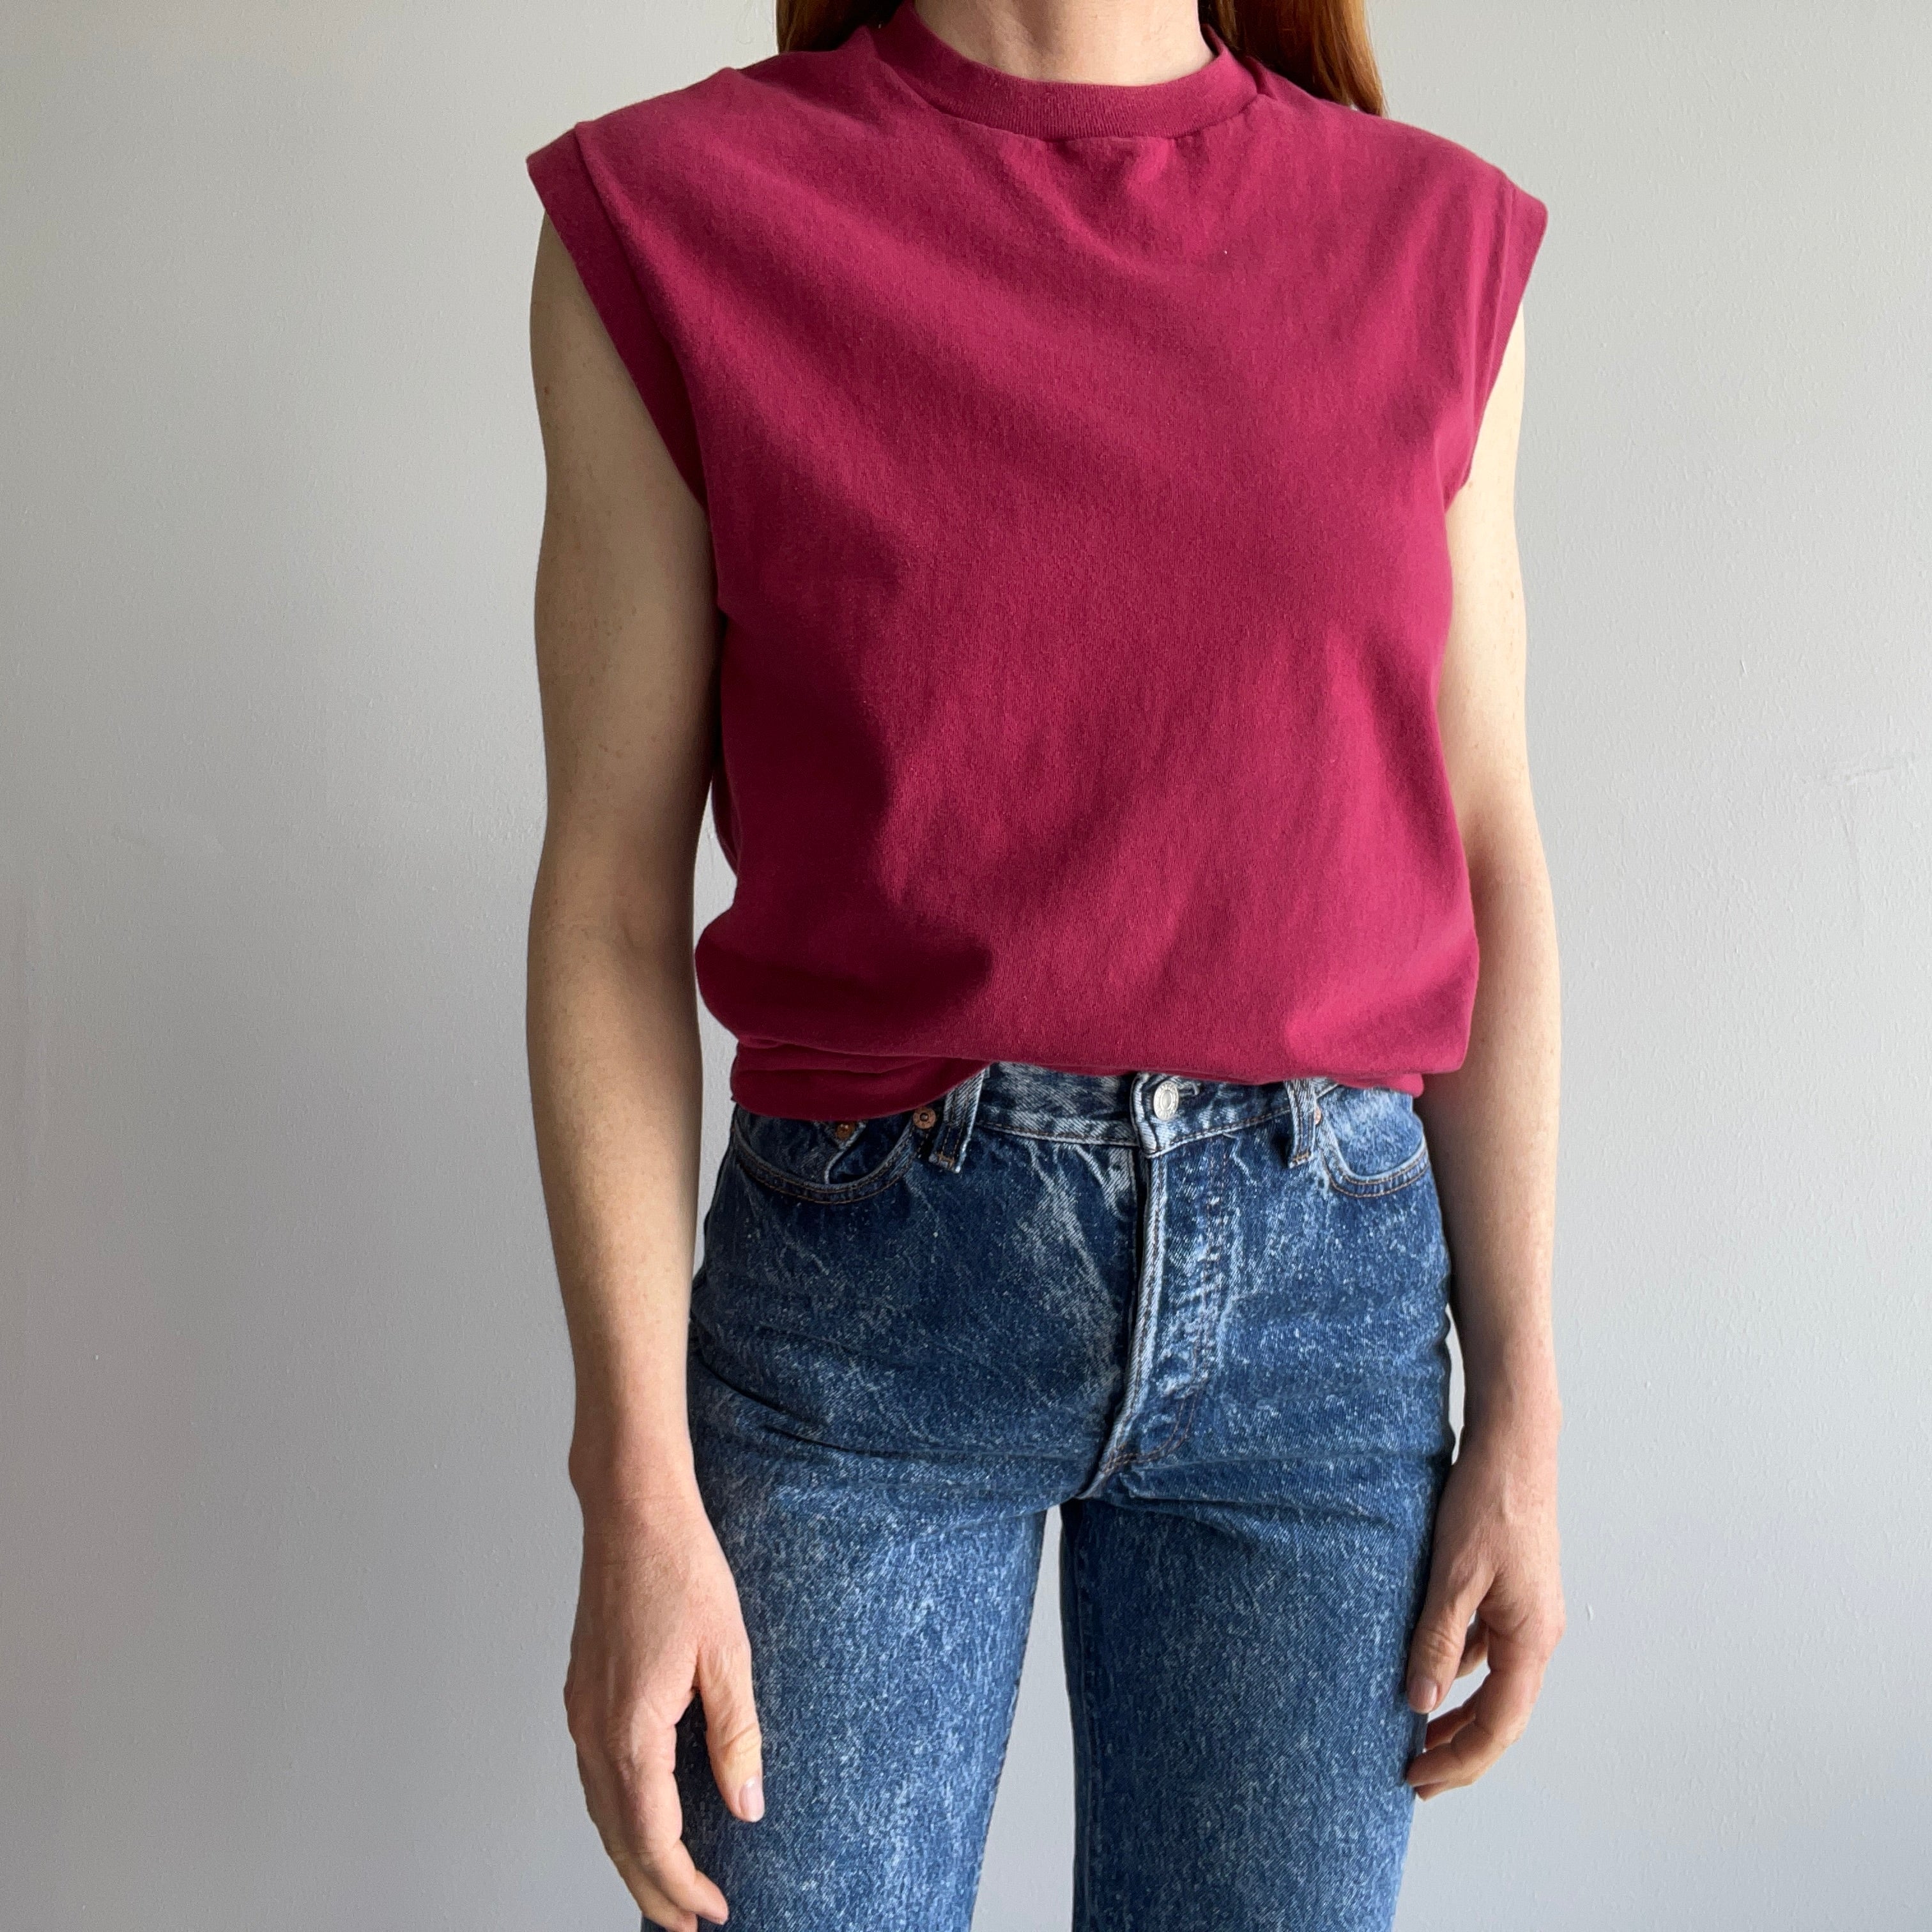 1980/90s Burgundy Cotton Muscle Tank Top